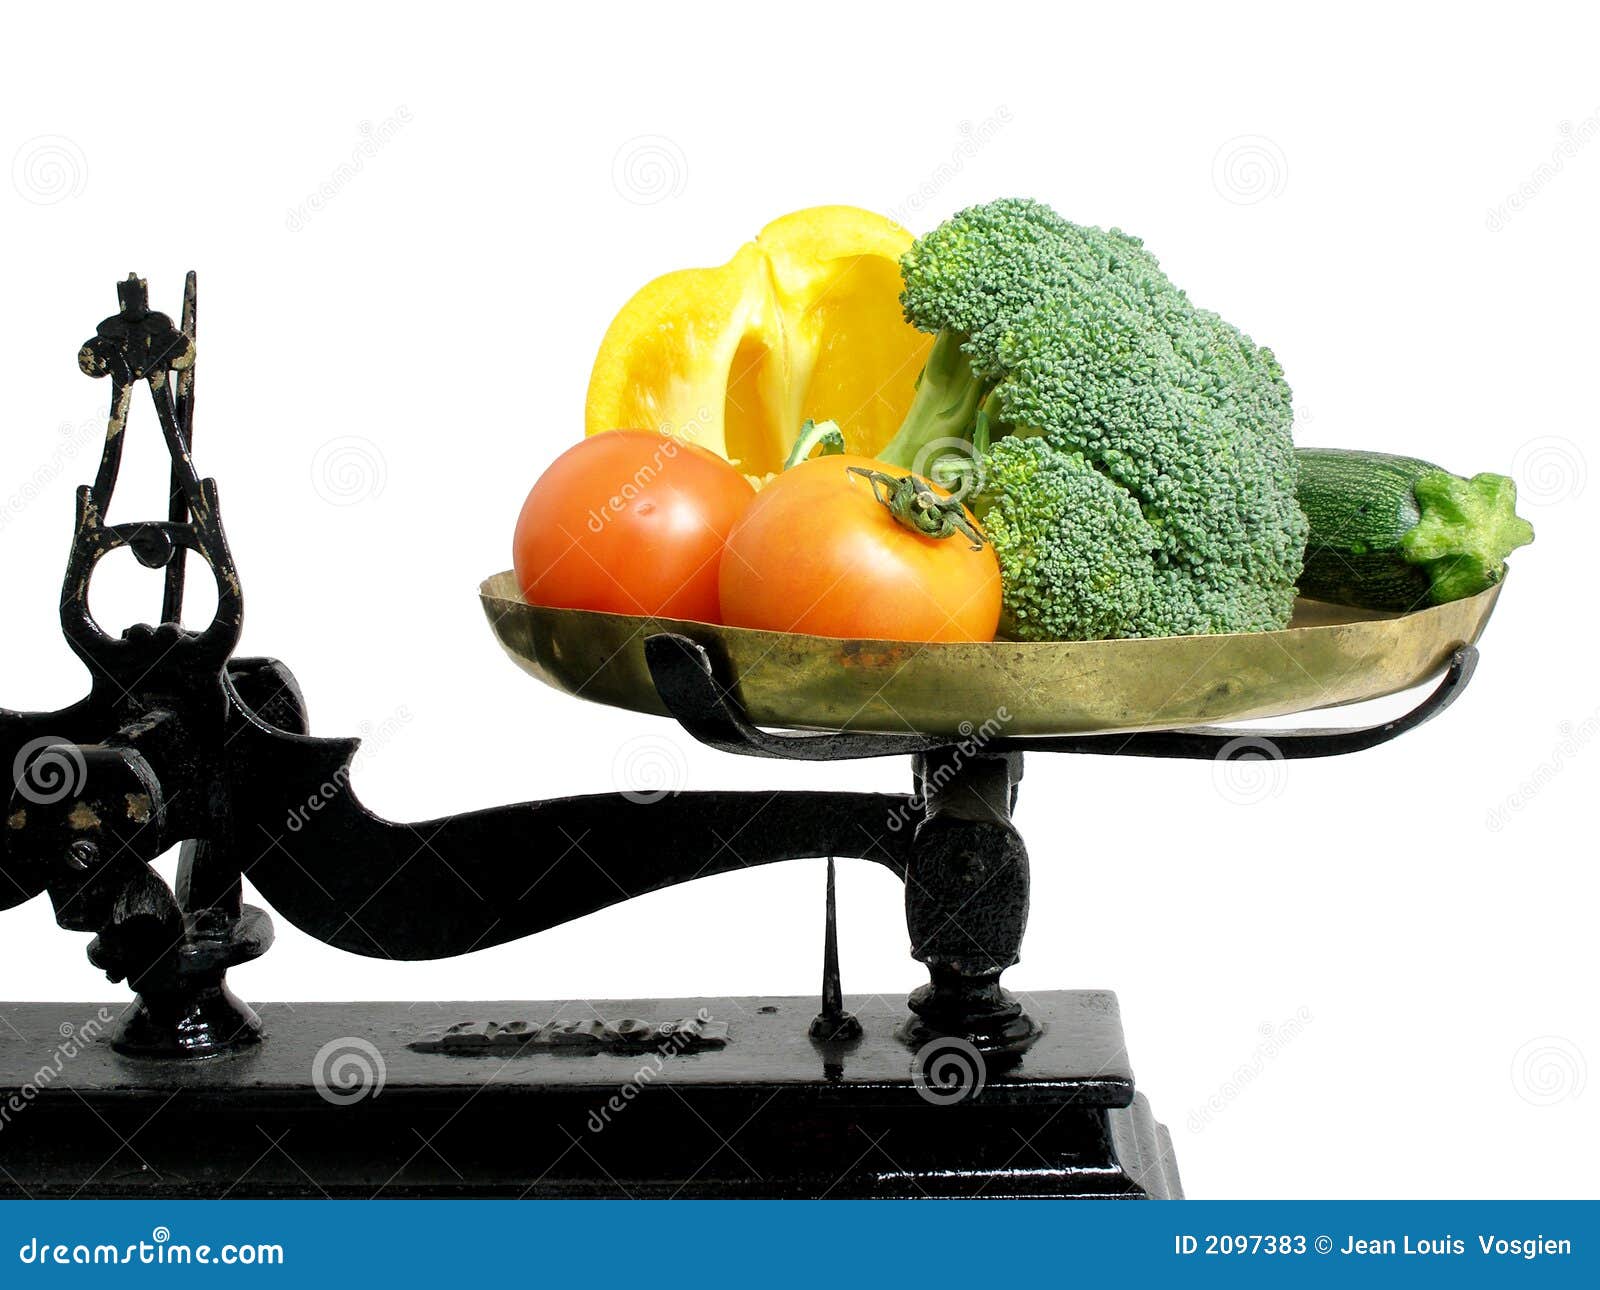 Diet vegetables 2 stock image. Image of nature, cooking - 2097383